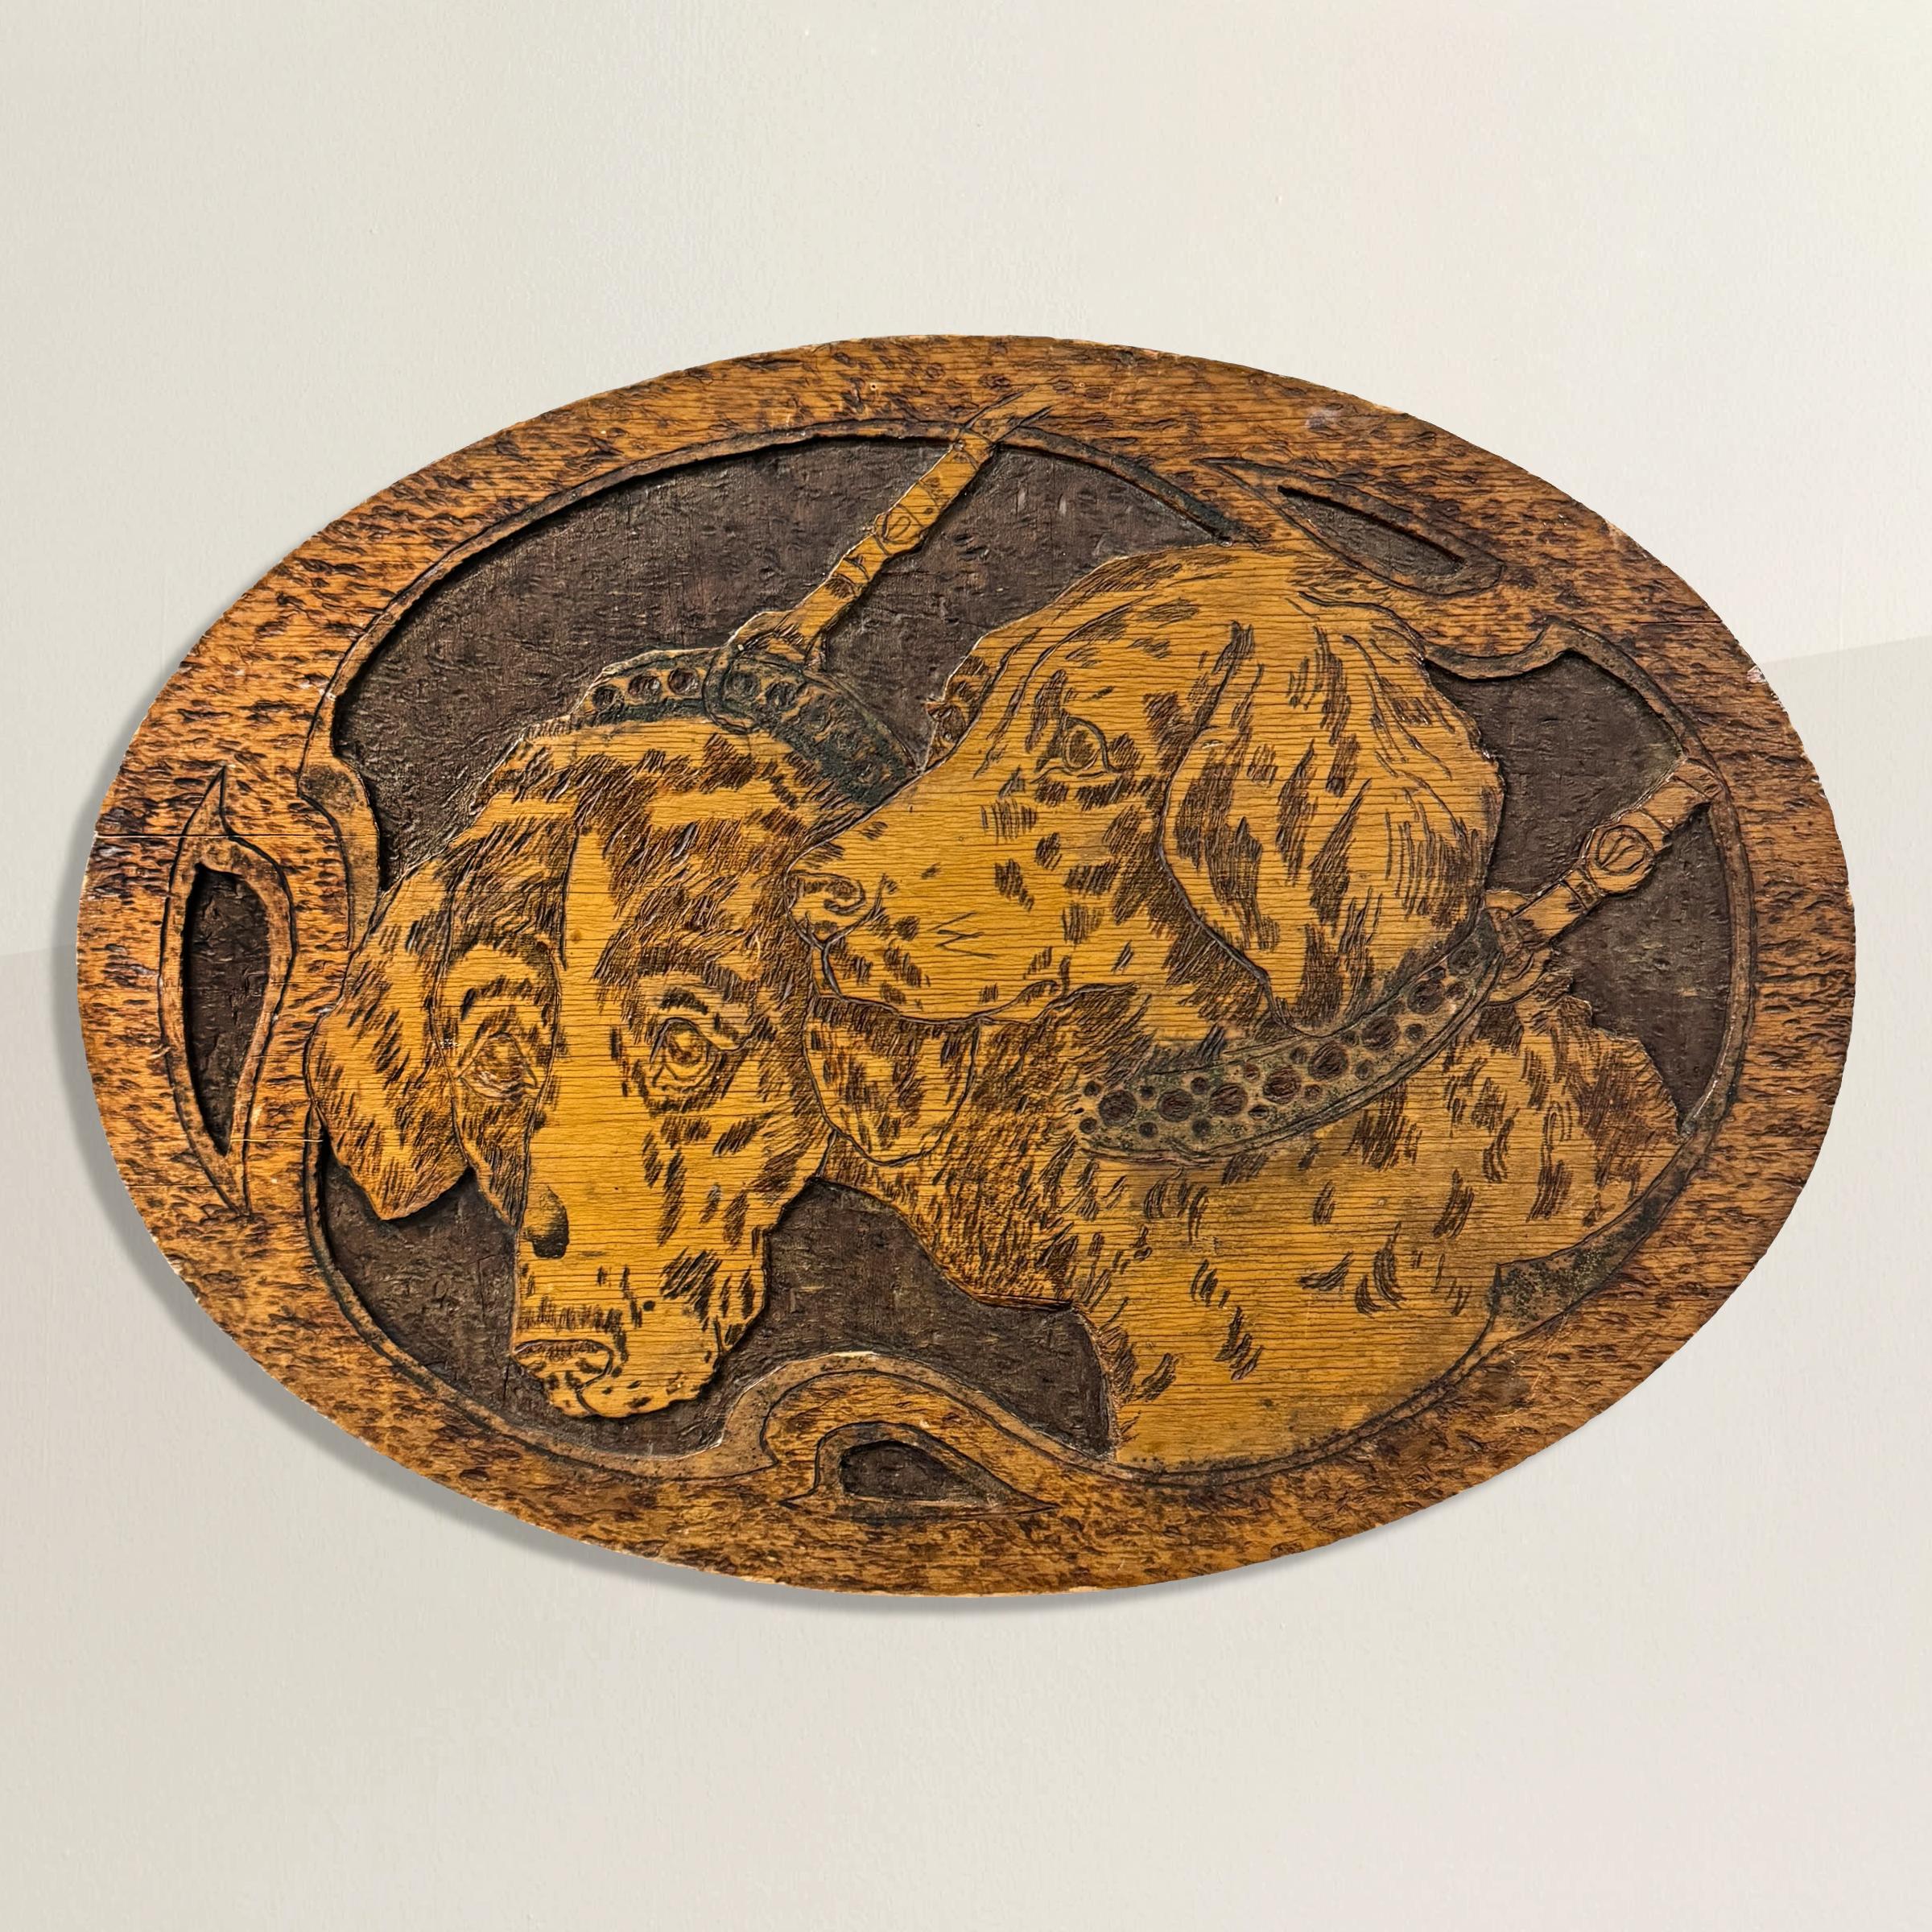 This early 20th-century Flemish low-relief panel showcases the exquisite artistry of pyrography, a technique where designs are burned into wood using a heated tool. Here, two hunting spaniels adorned with studded collars and leashes are meticulously